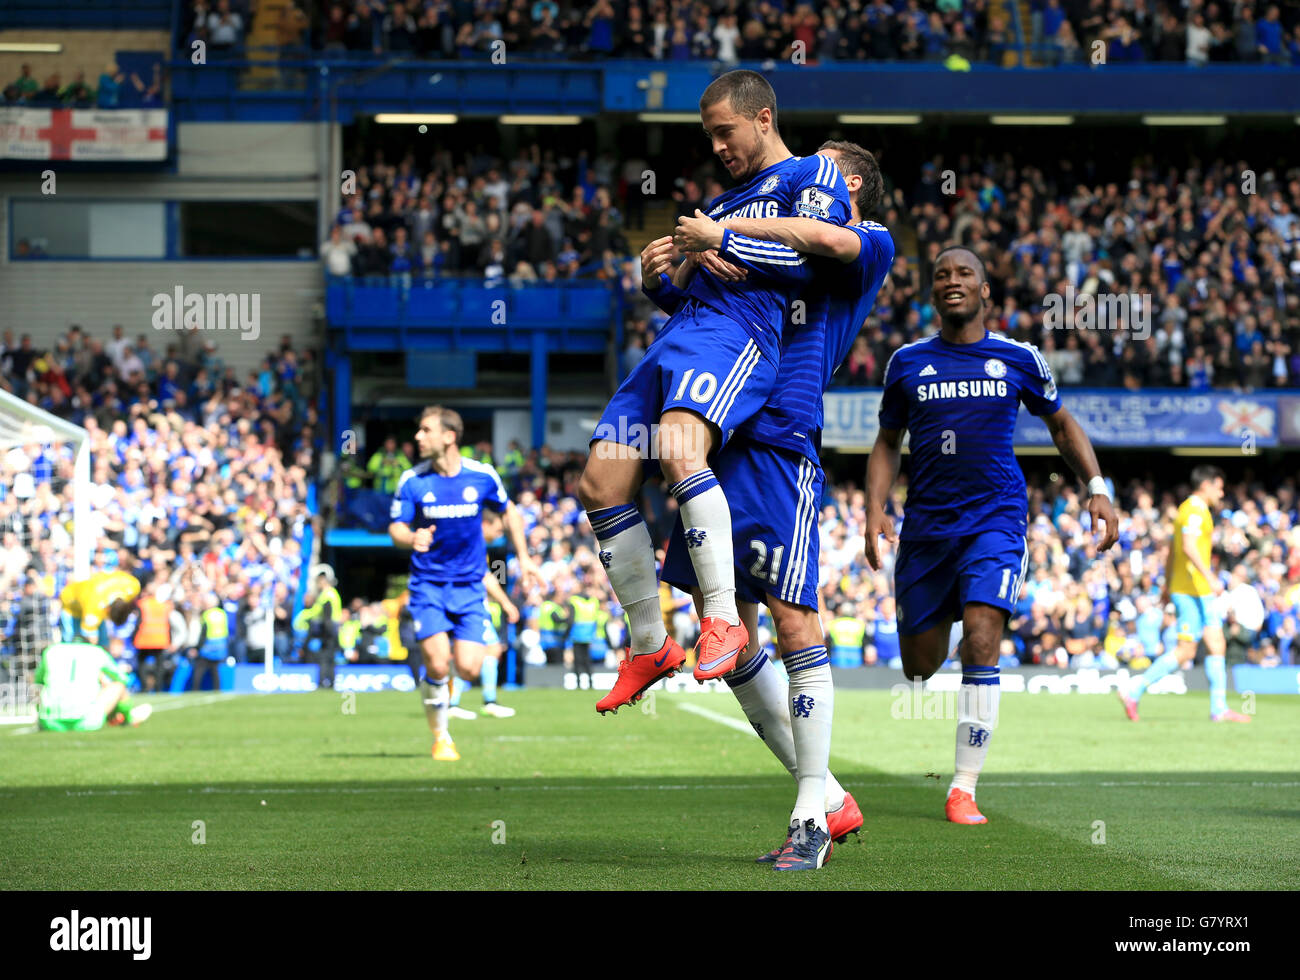 Chelsea's Eden Hazard celebrates with teammates after missing his penalty but scoring with the rebound header during the Barclays Premier League match at Stamford Bridge, London. PRESS ASSOCIATION Photo. Picture date: Sunday May 3, 2015. See PA story SOCCER Chelsea. Photo credit should read: Nick Potts/PA Wire. Stock Photo